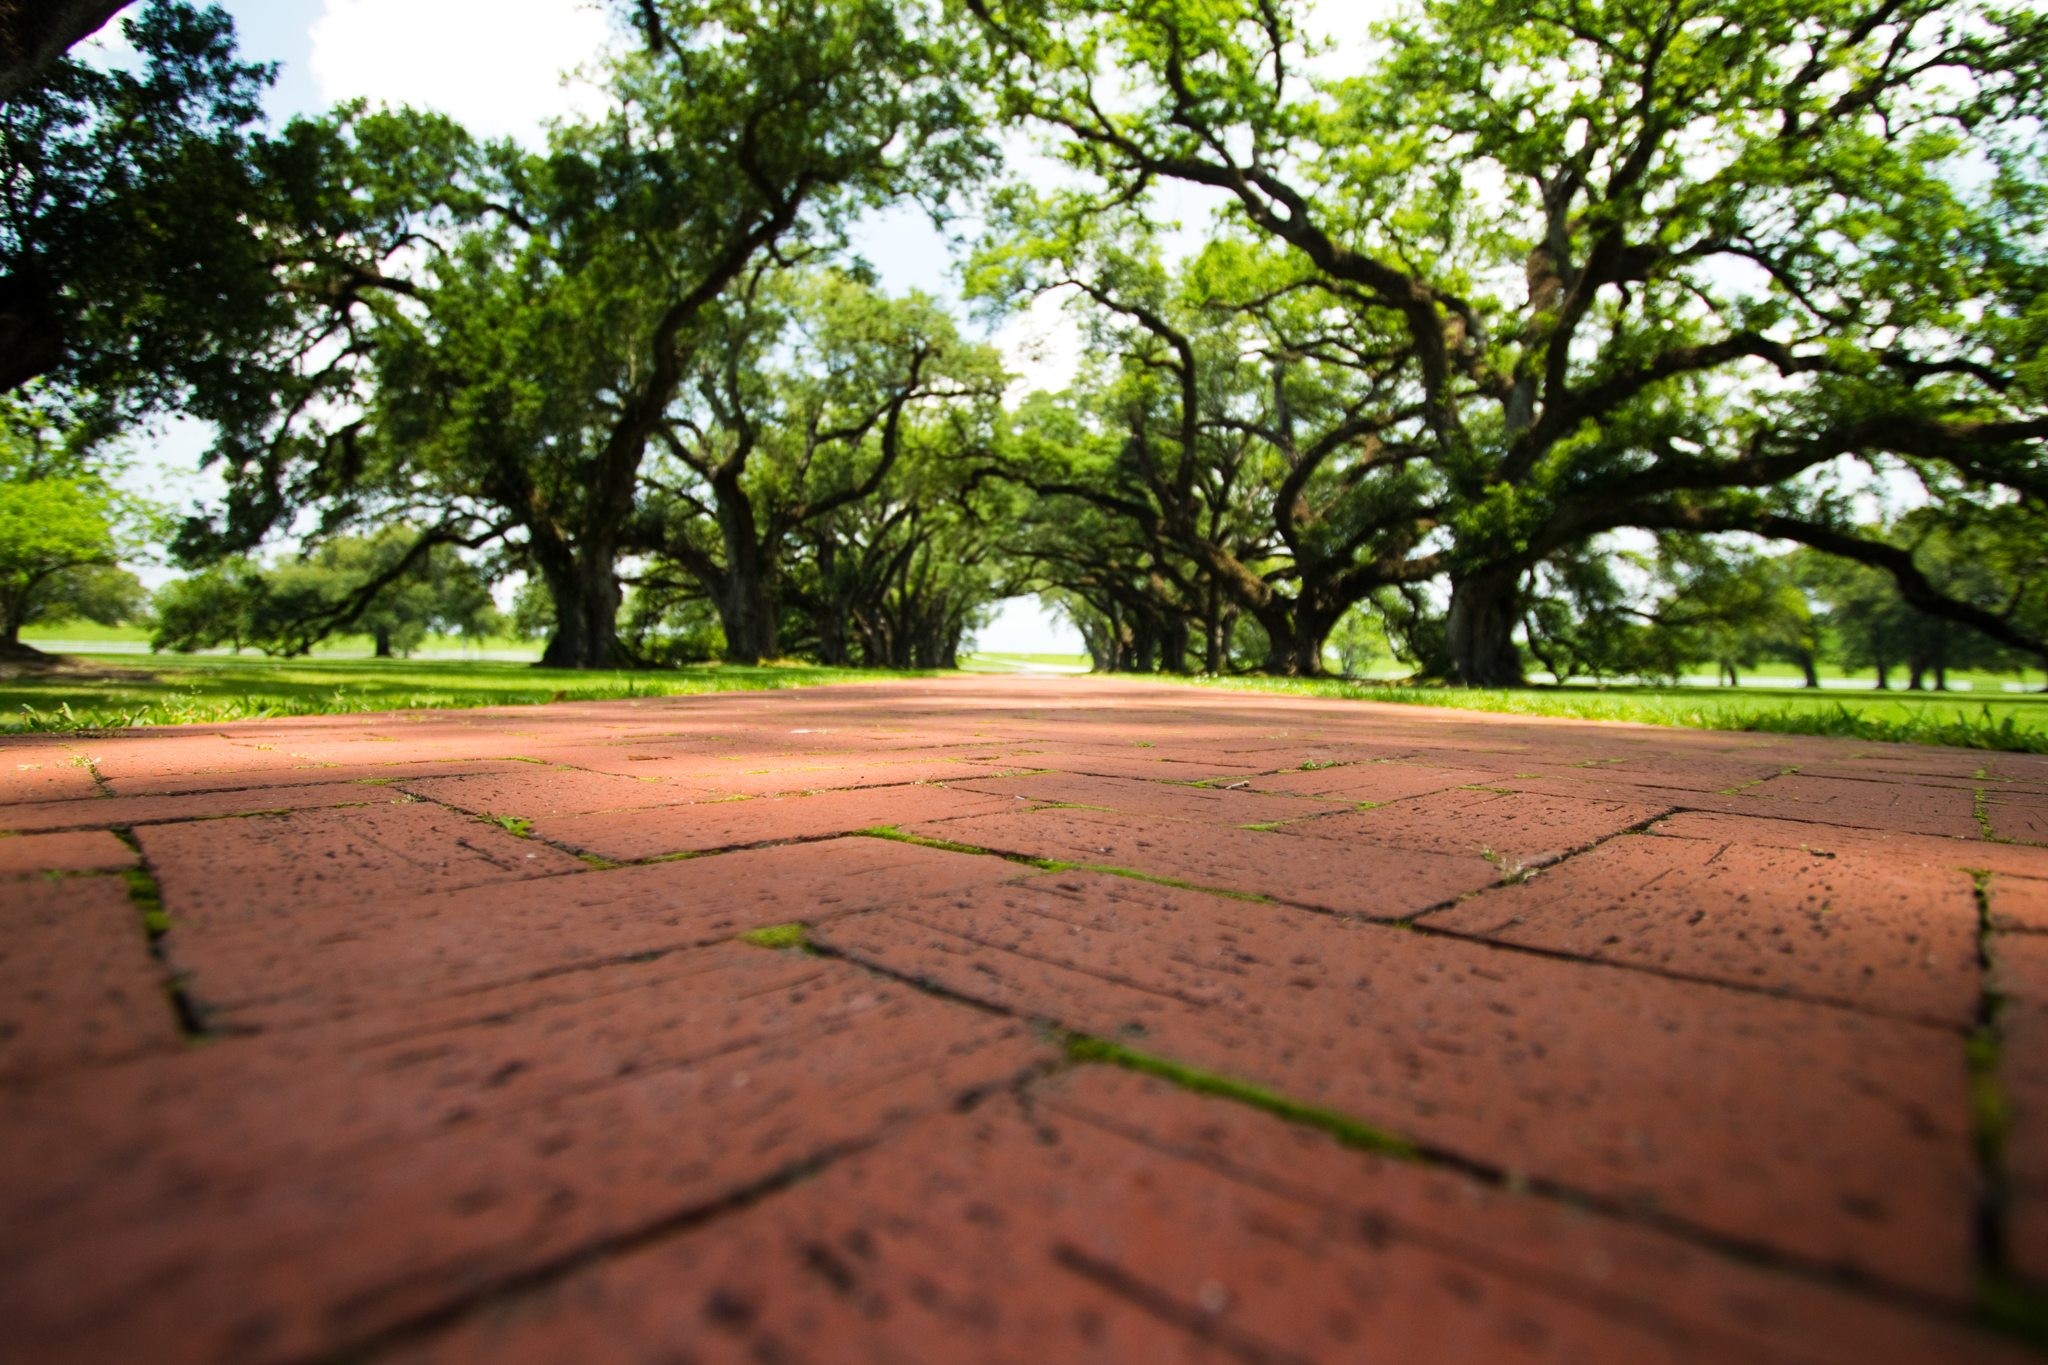 Oak Alley Plantation in St. James Parish, Louisiana often has lots of visitors wandering the grounds. Preferring not to photoshop people from the frame, I waited awhile for a clear view down the path of centuries-old oak trees.